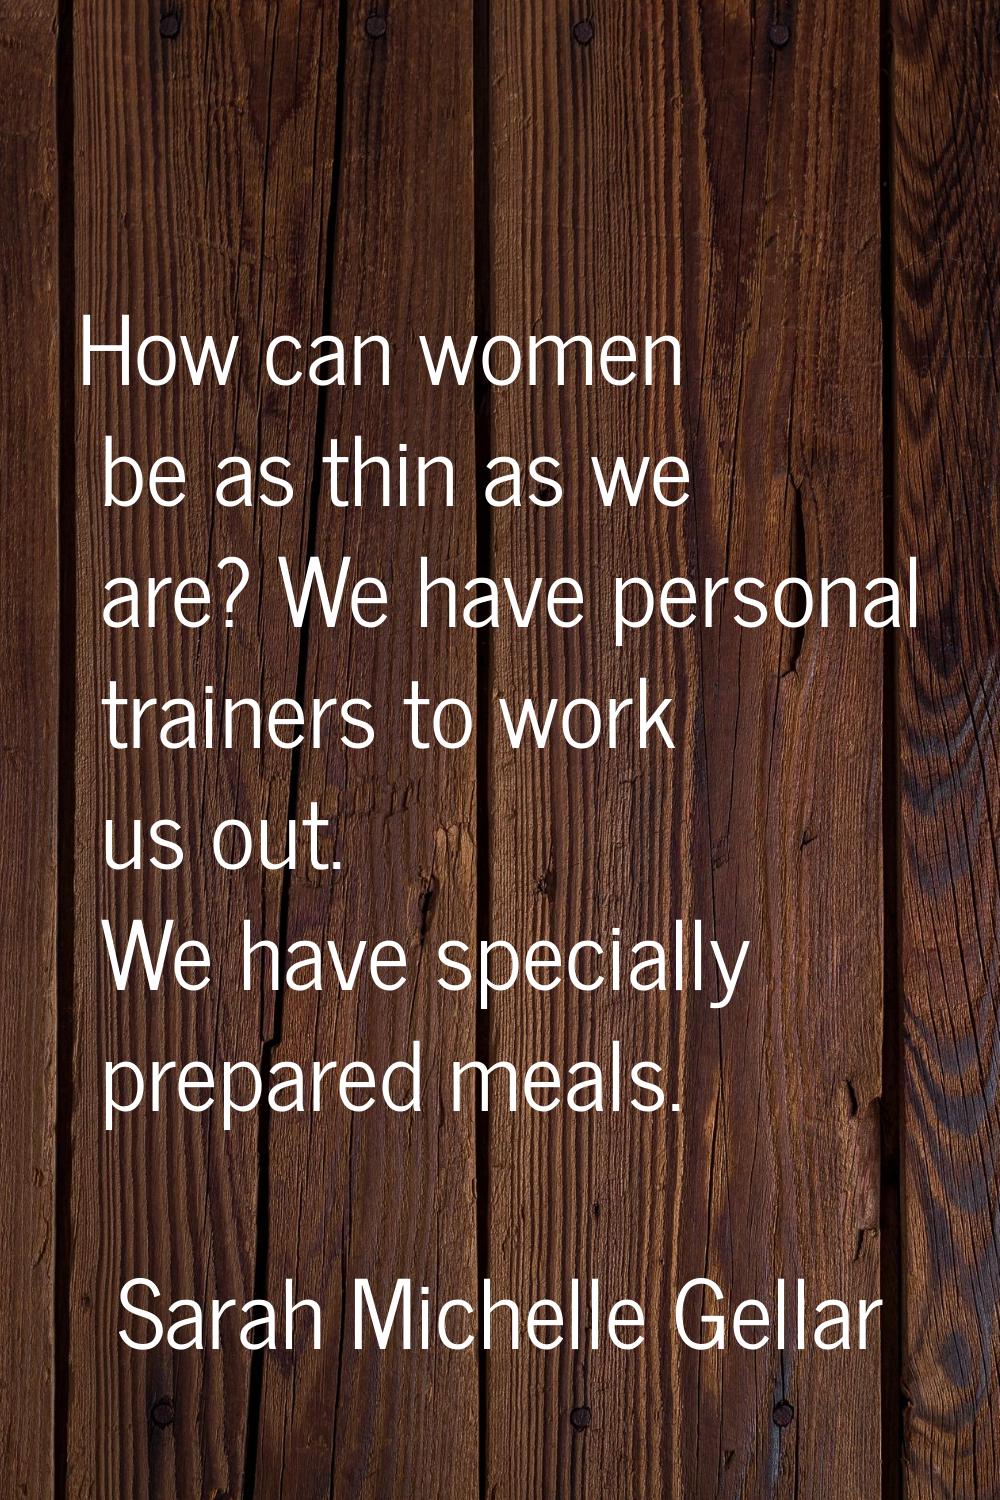 How can women be as thin as we are? We have personal trainers to work us out. We have specially pre